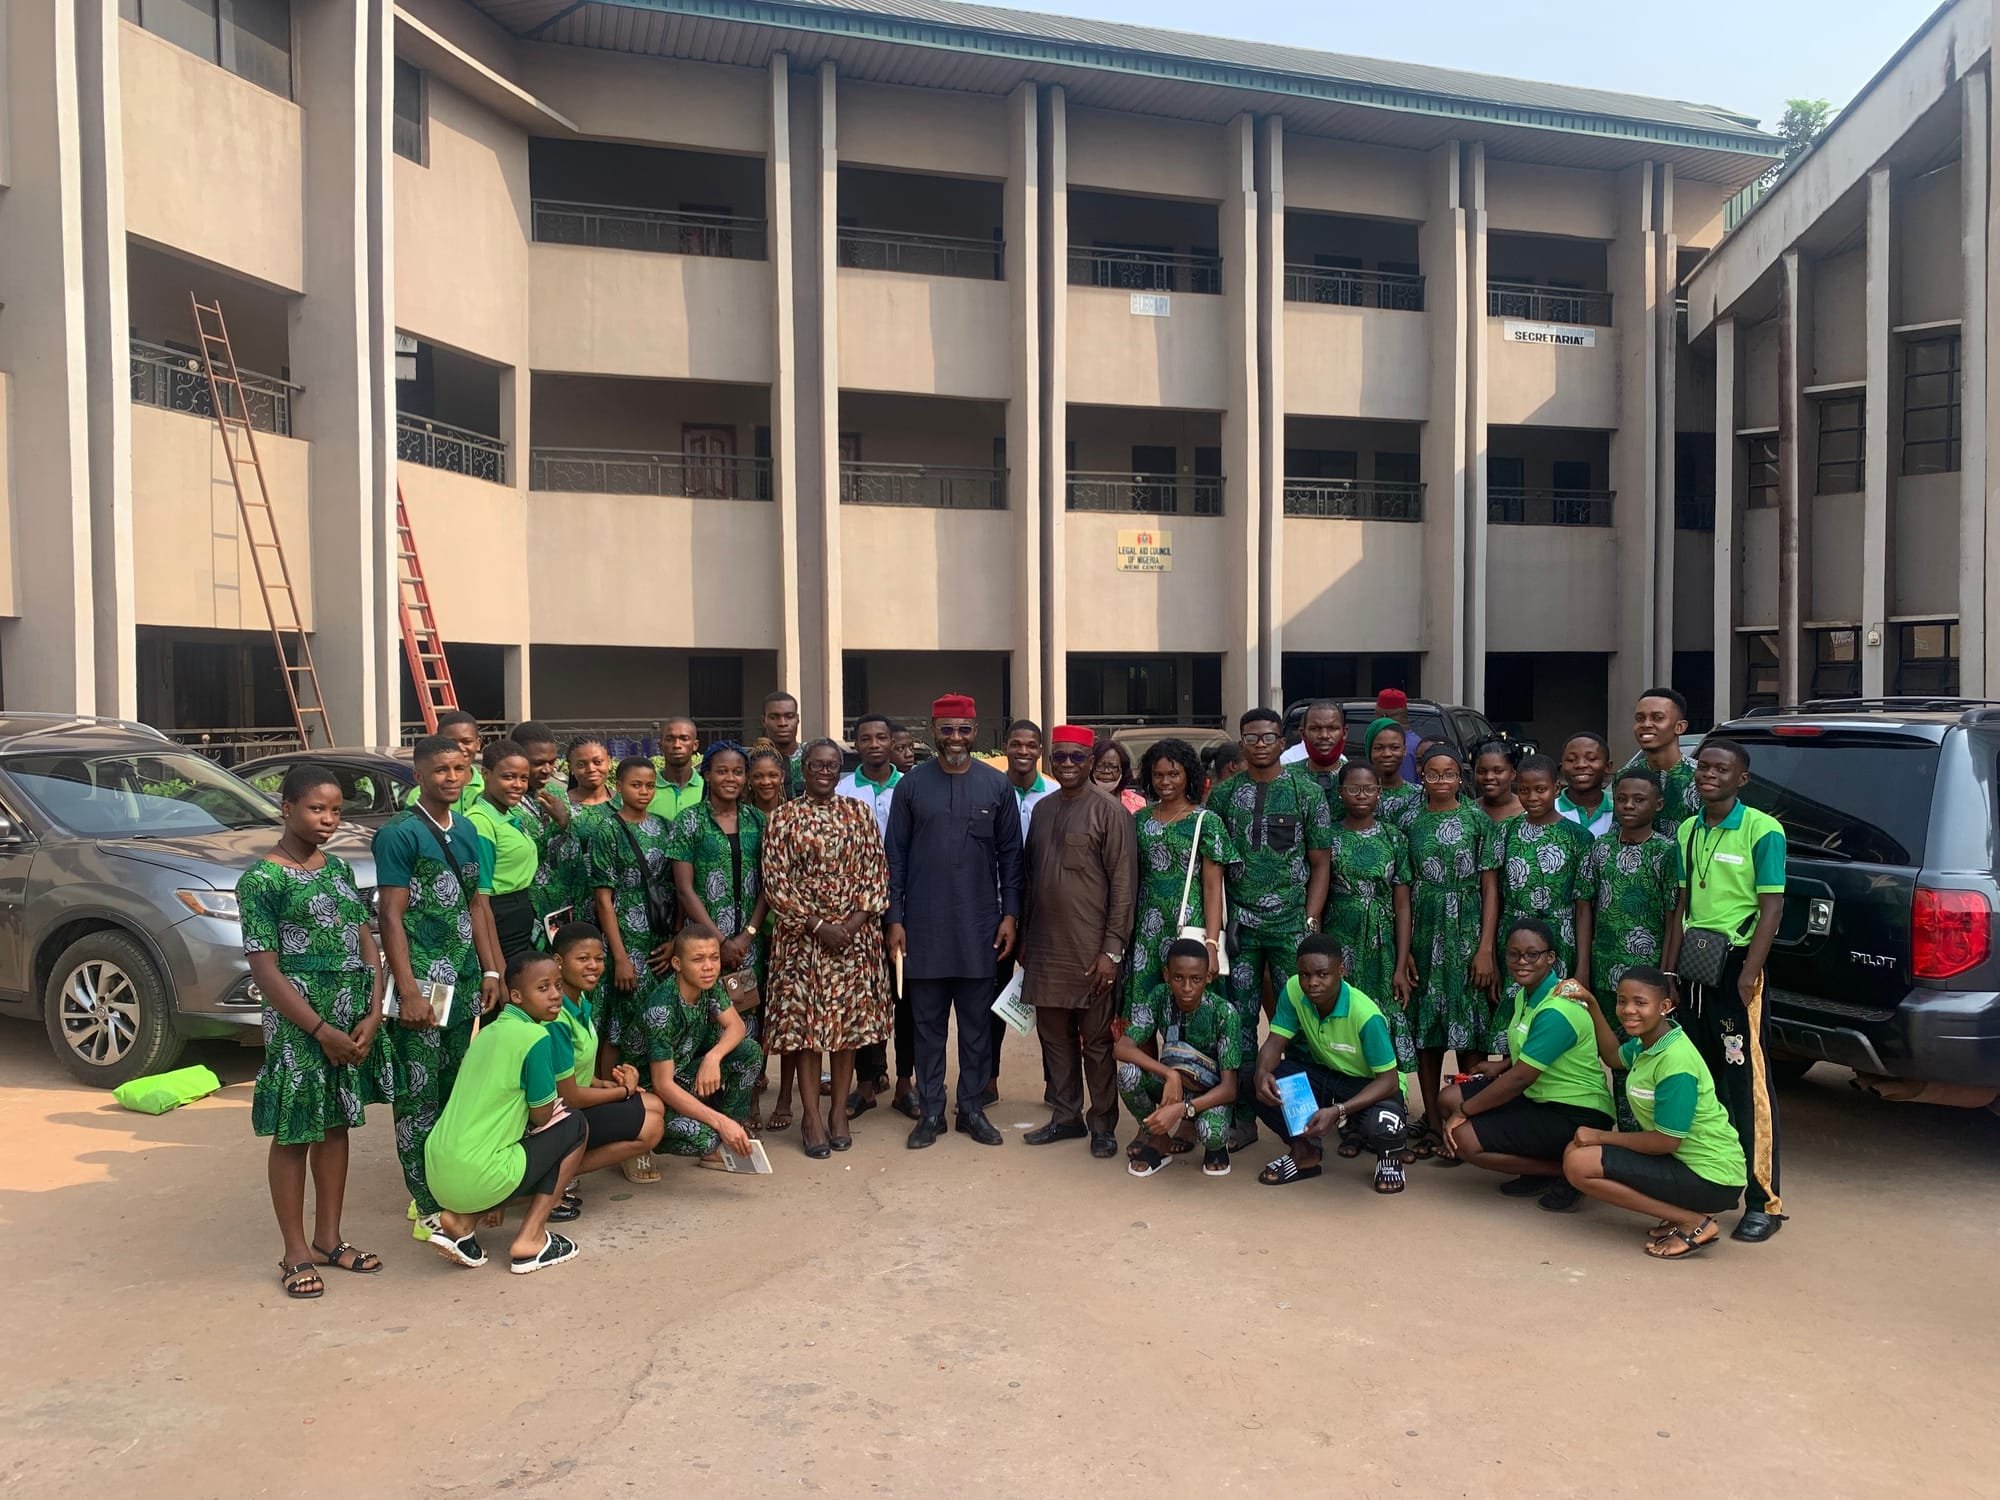 The Chairman of the occasion [Chief Osita Chidoka] with the beneficiaries of the foundation